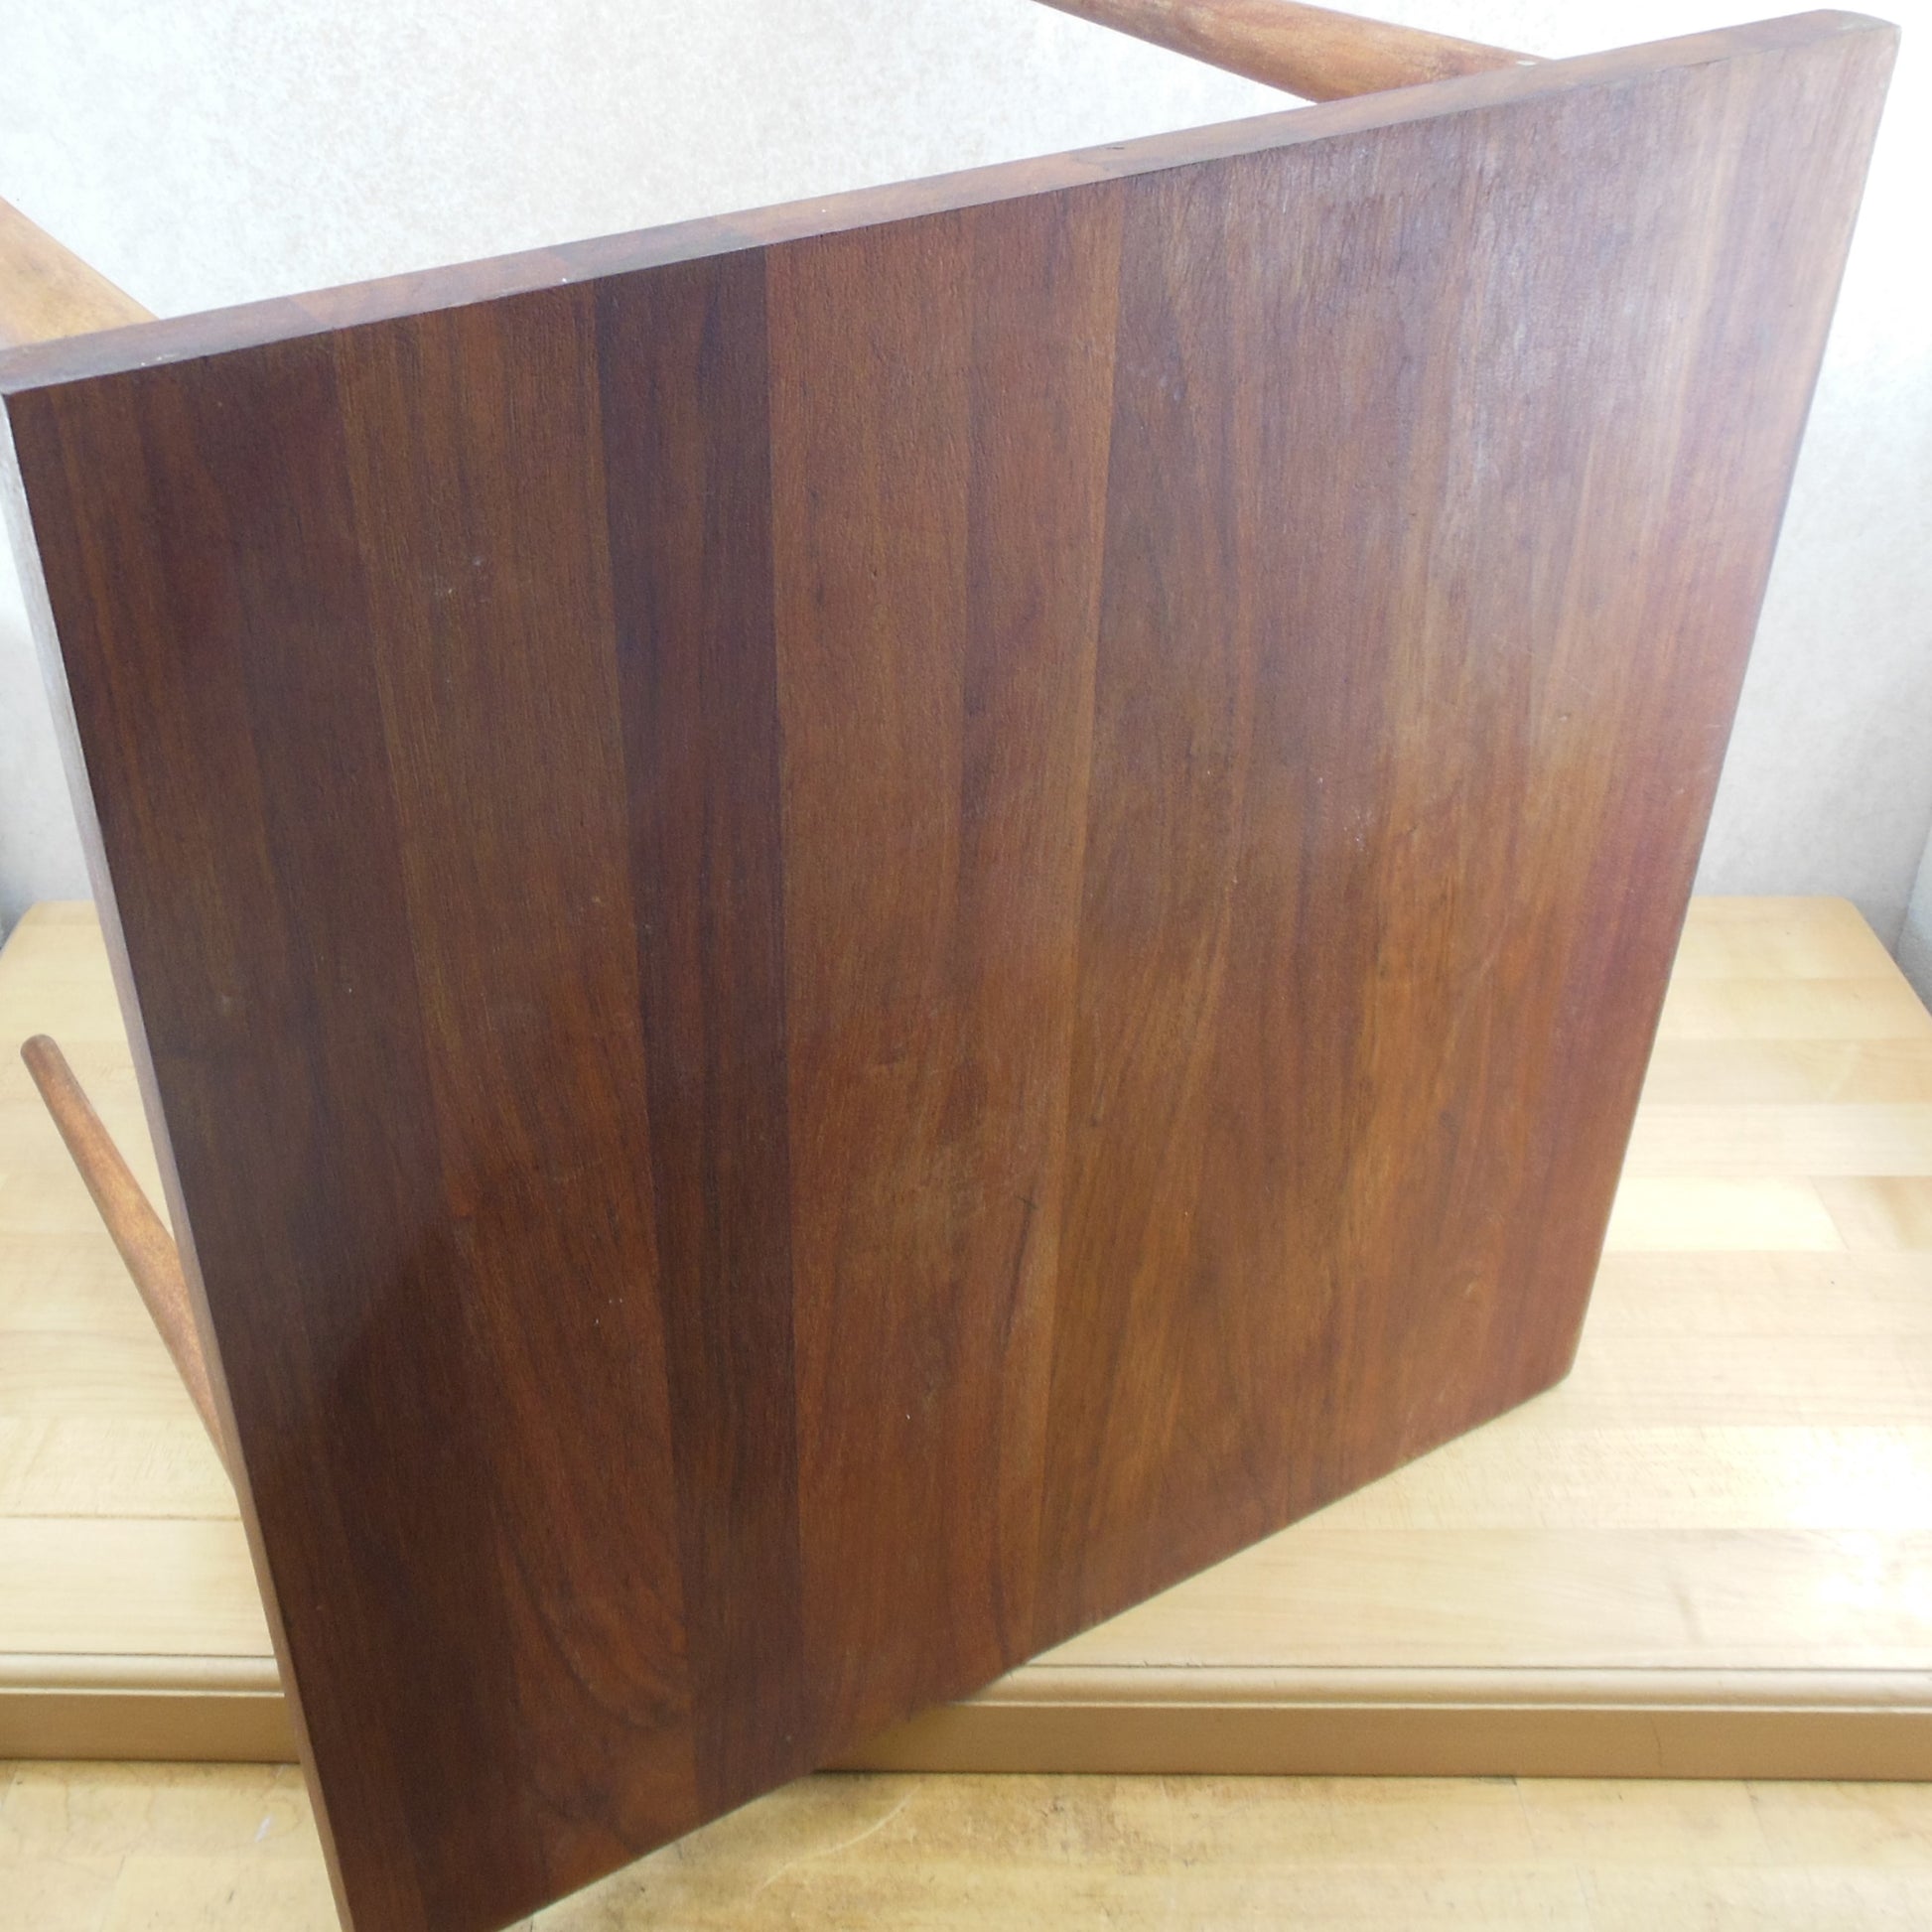 Unbranded MCM Solid Wood Side Table 16 x 16 x 15.5 Inches Used